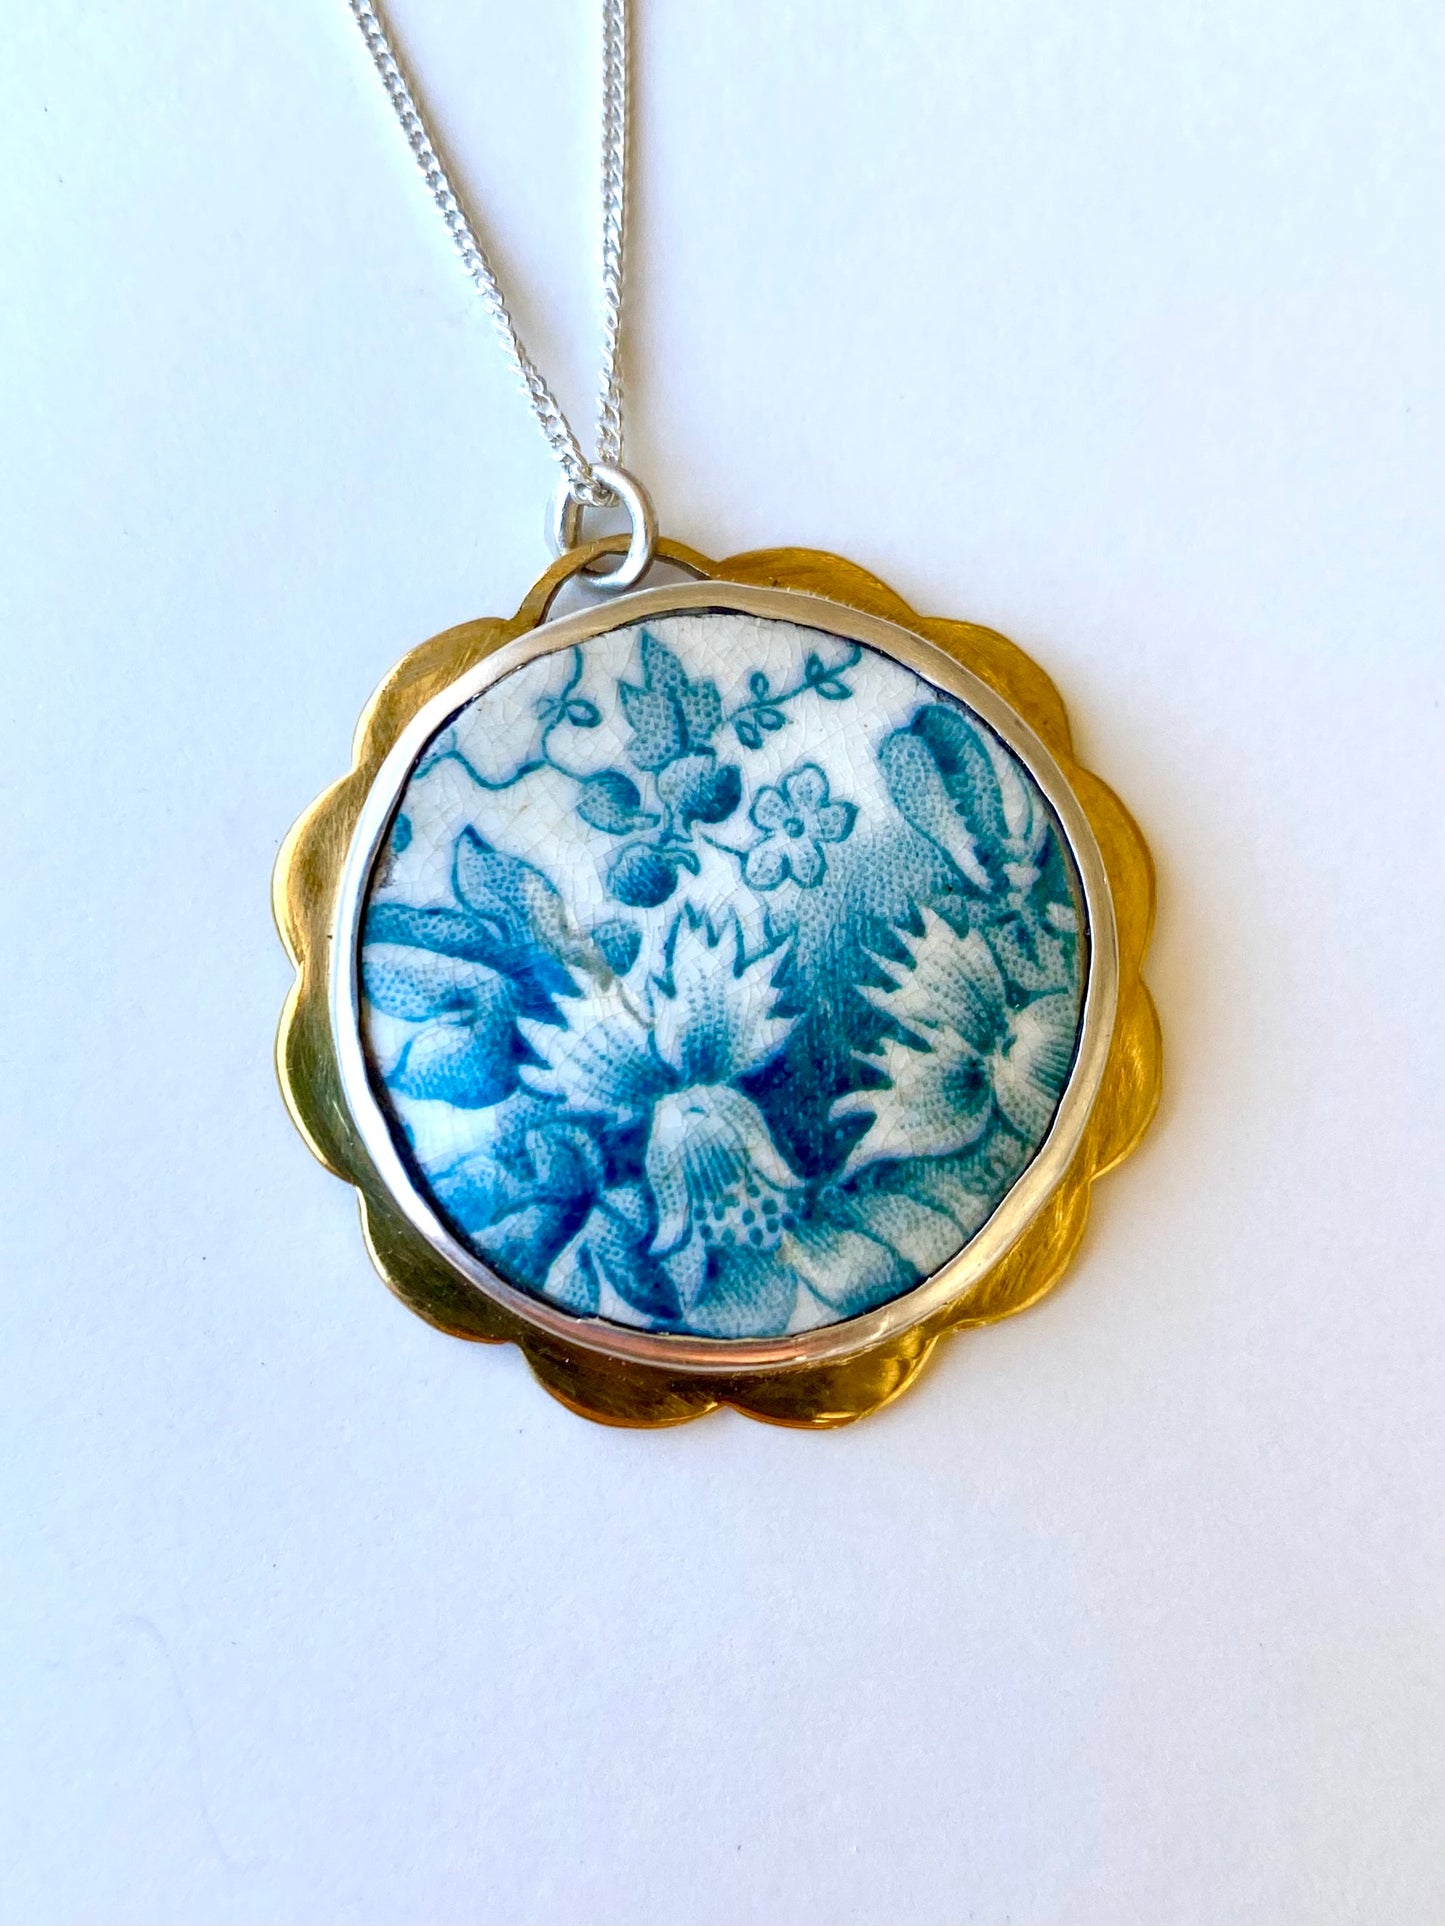 Green floral ceramic set in silver and brass scalloped detail pendant.